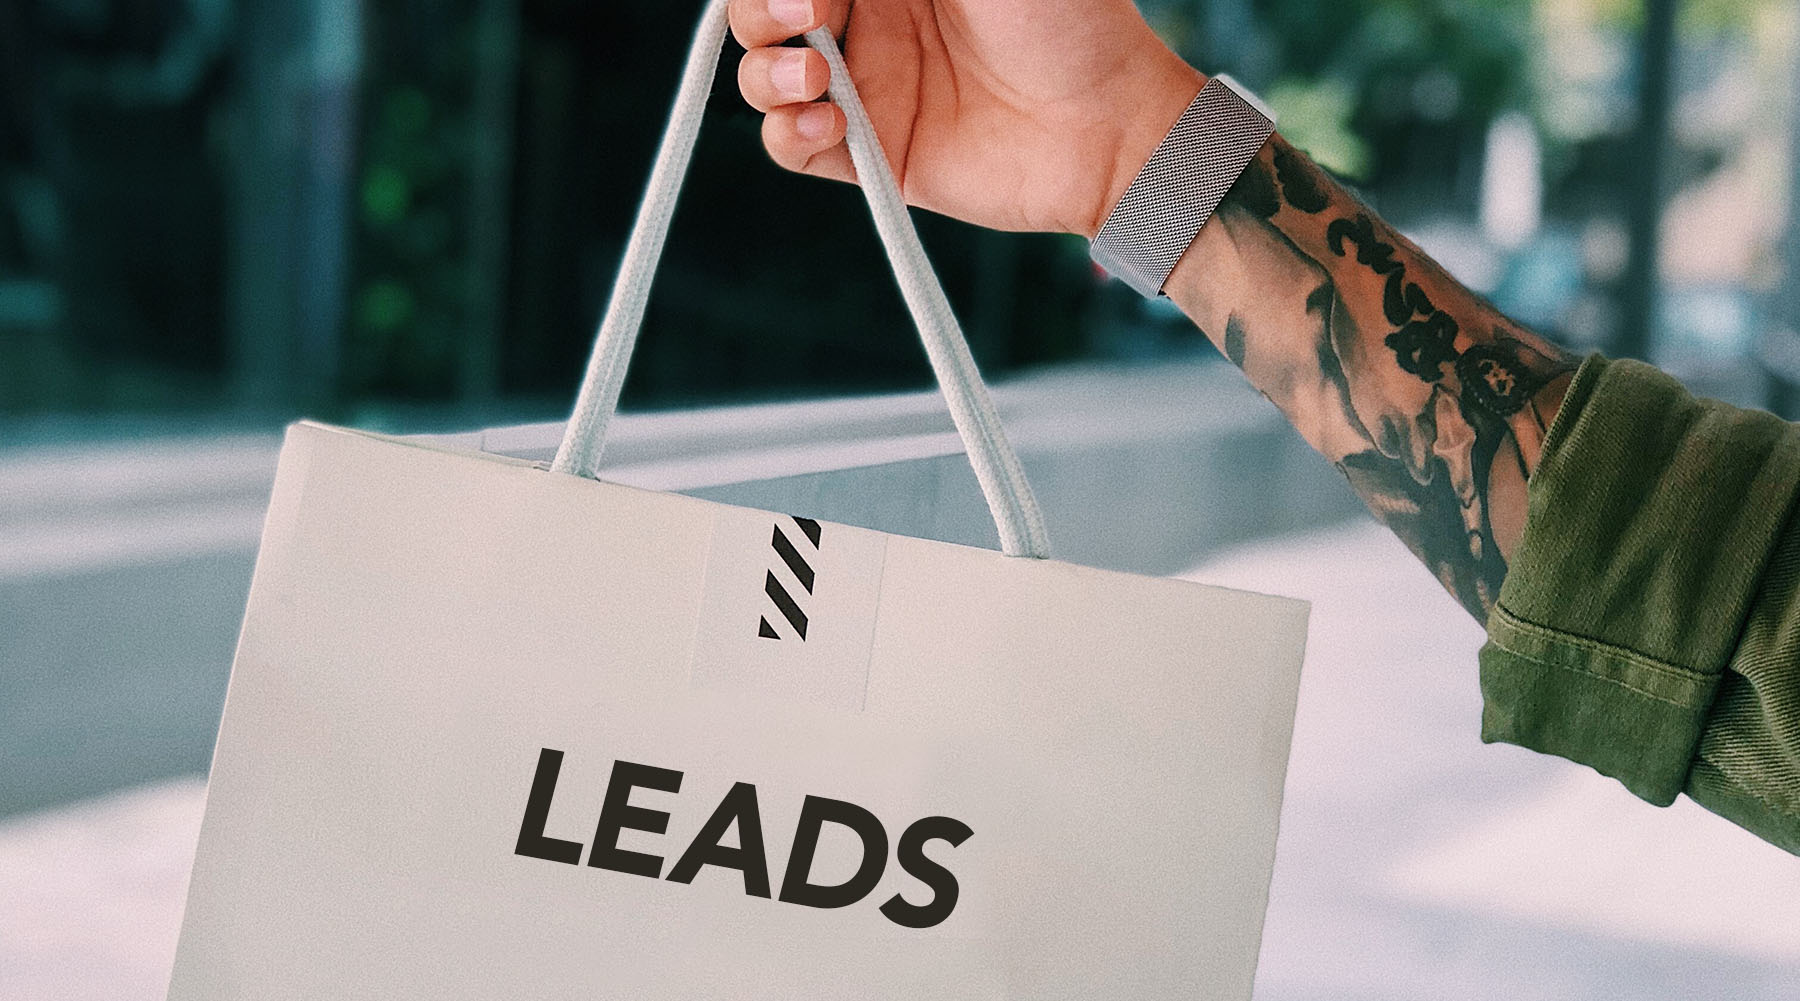 person with a heavily tattooed arm holding up a white bad with the word "leads" on it